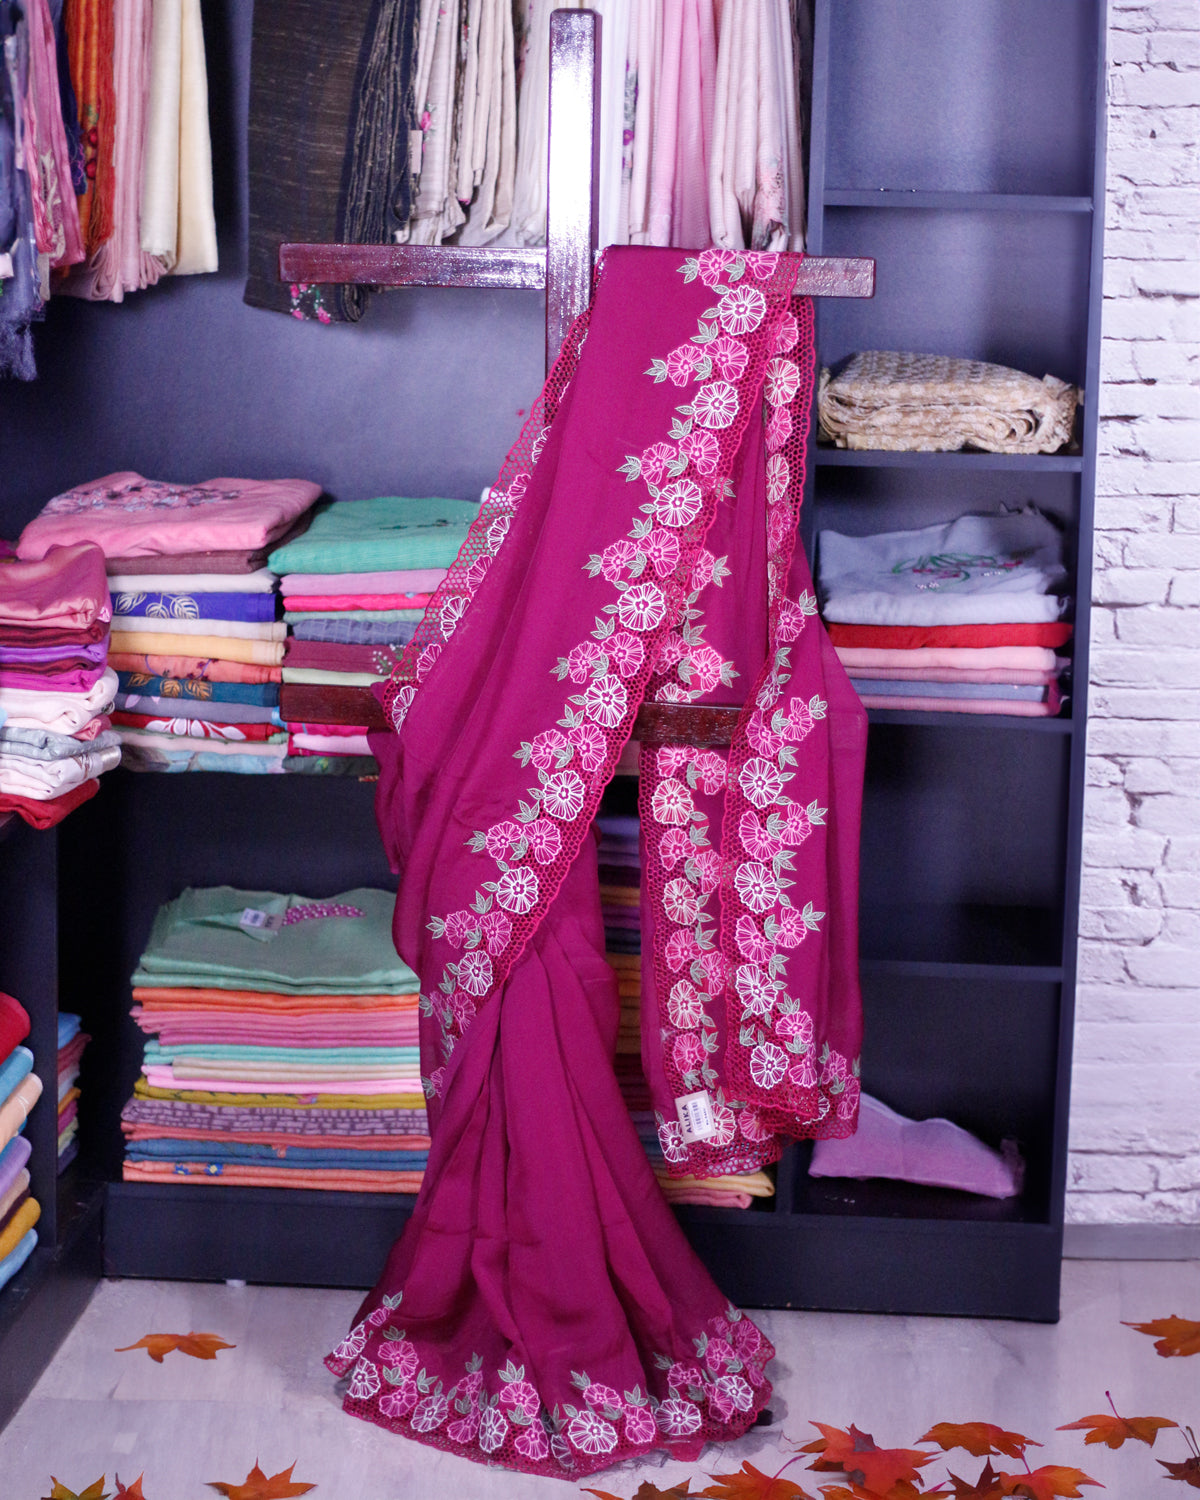 DARK PINK ORGANZA SAREE WITH FULL BORDER CUTWORK  AND FLORAL  EMBROIDERY